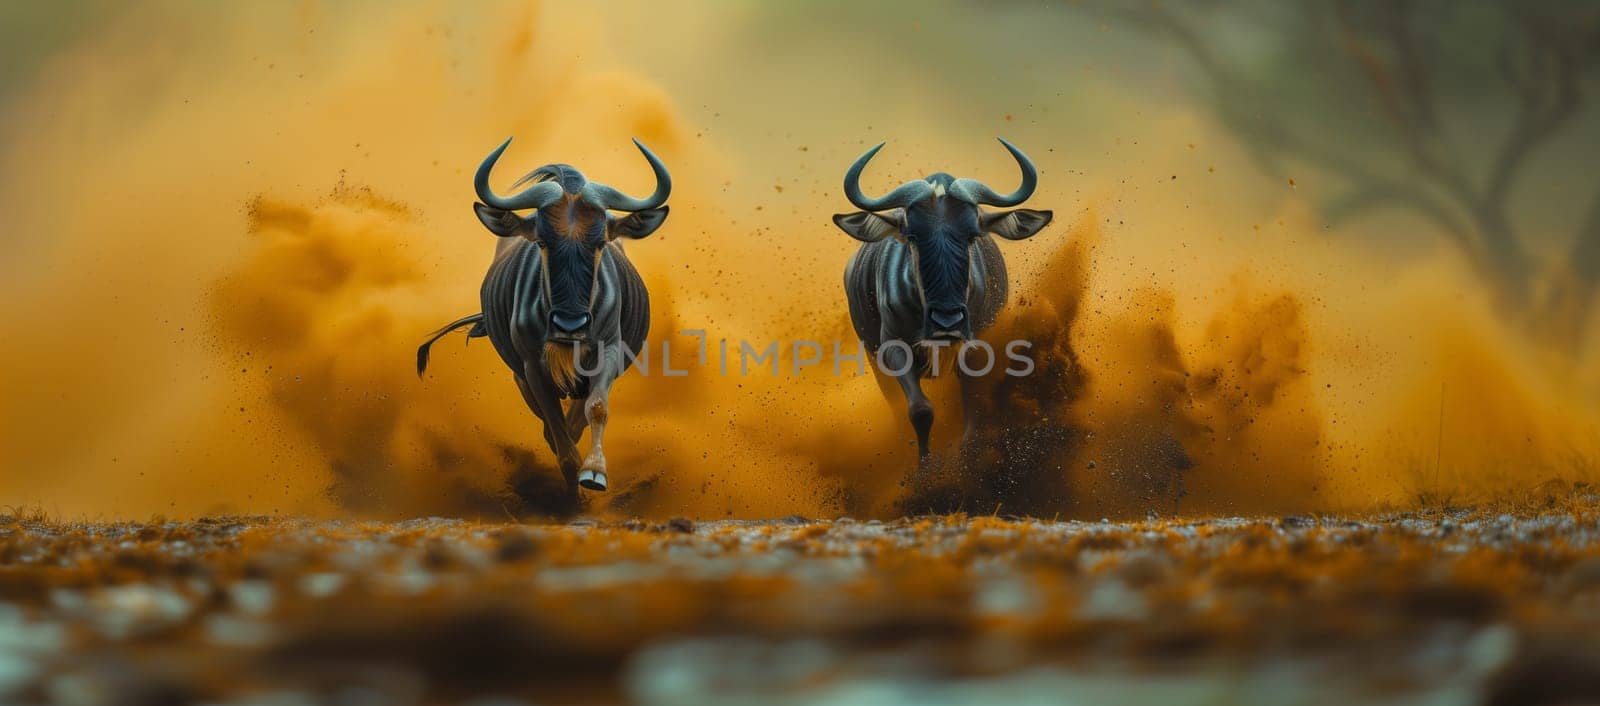 Two bulls running on a dirt bridge in a natural landscape by richwolf